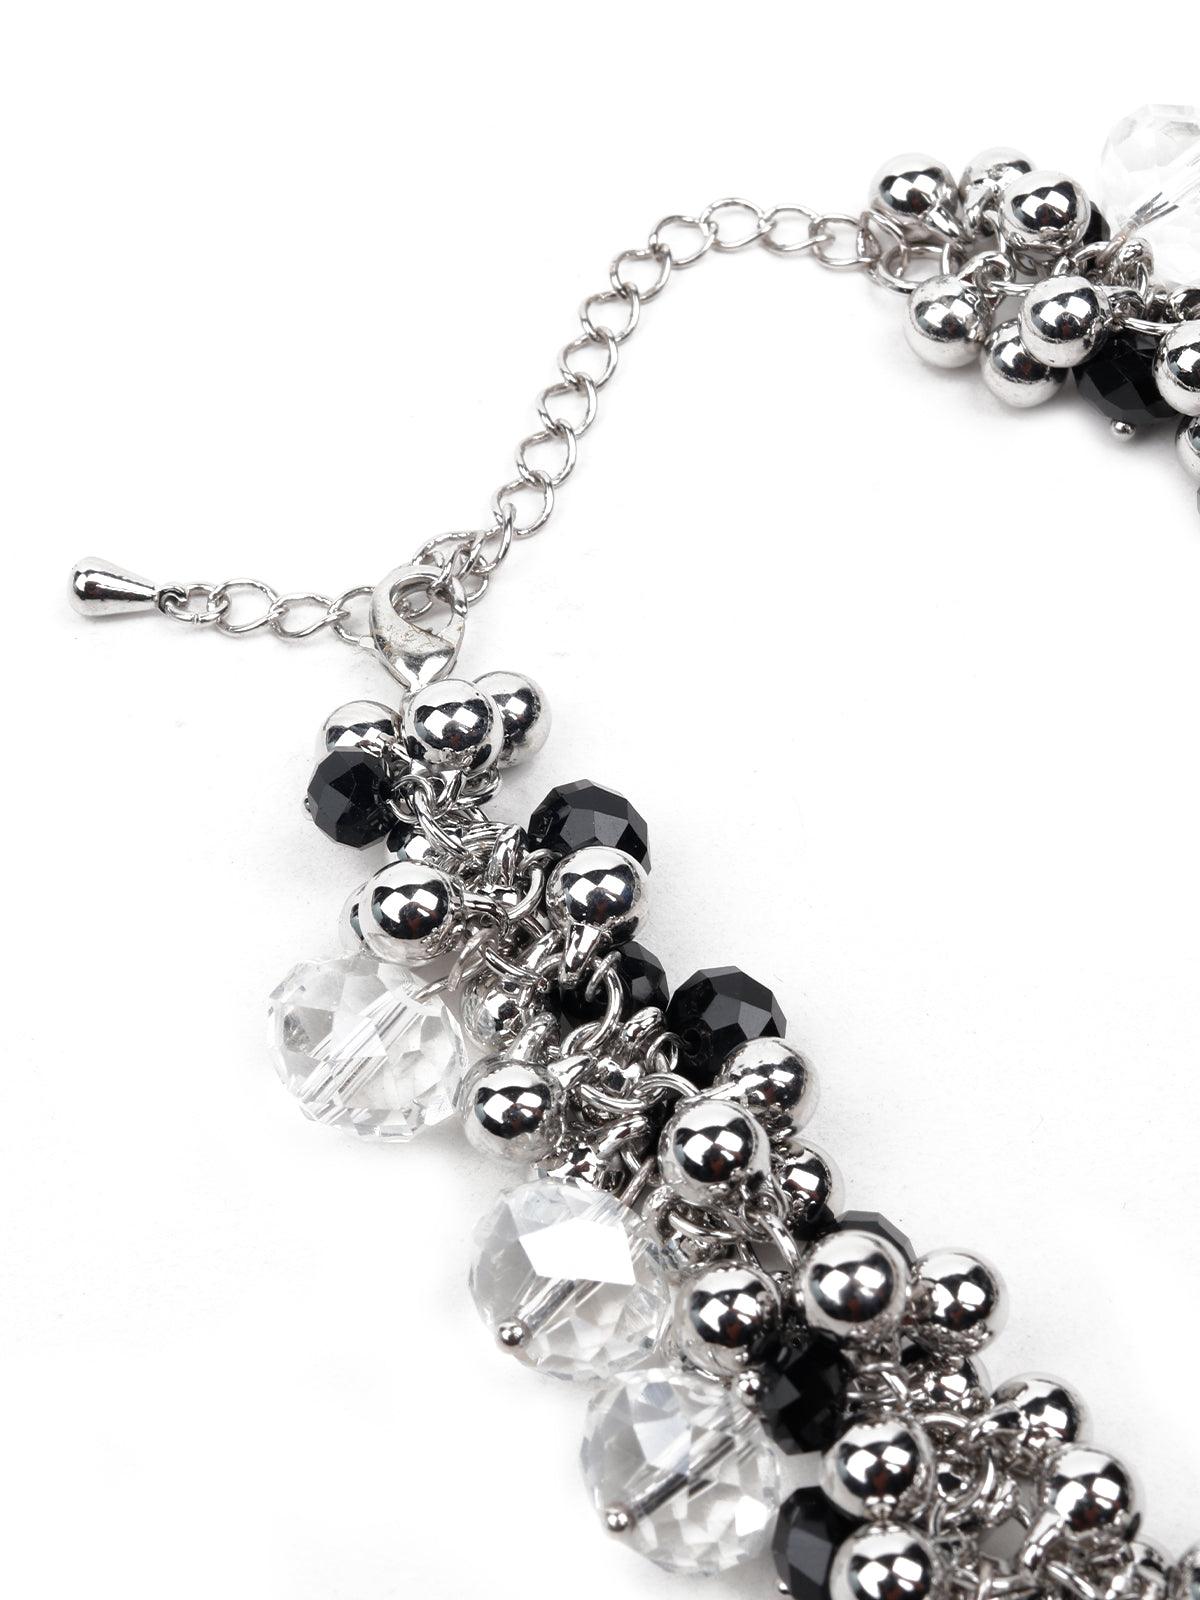 Women's Silver And A Black Faux Beads Statement Necklace - Odette